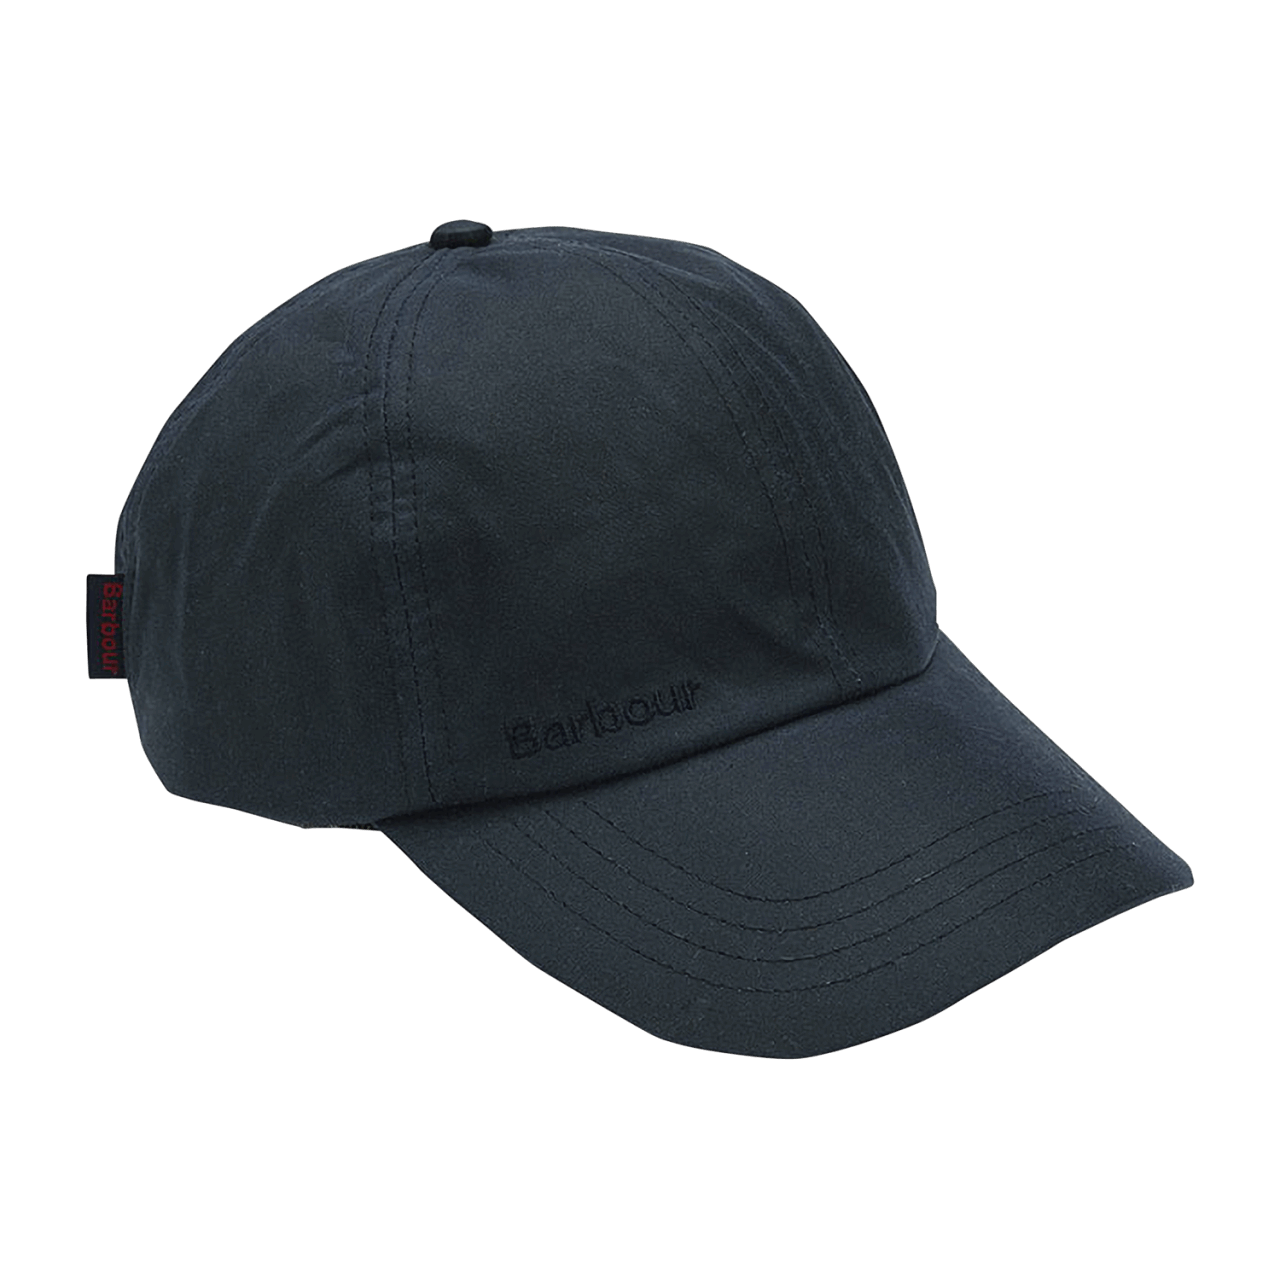 Barbour Waxed Sports Cap - navy